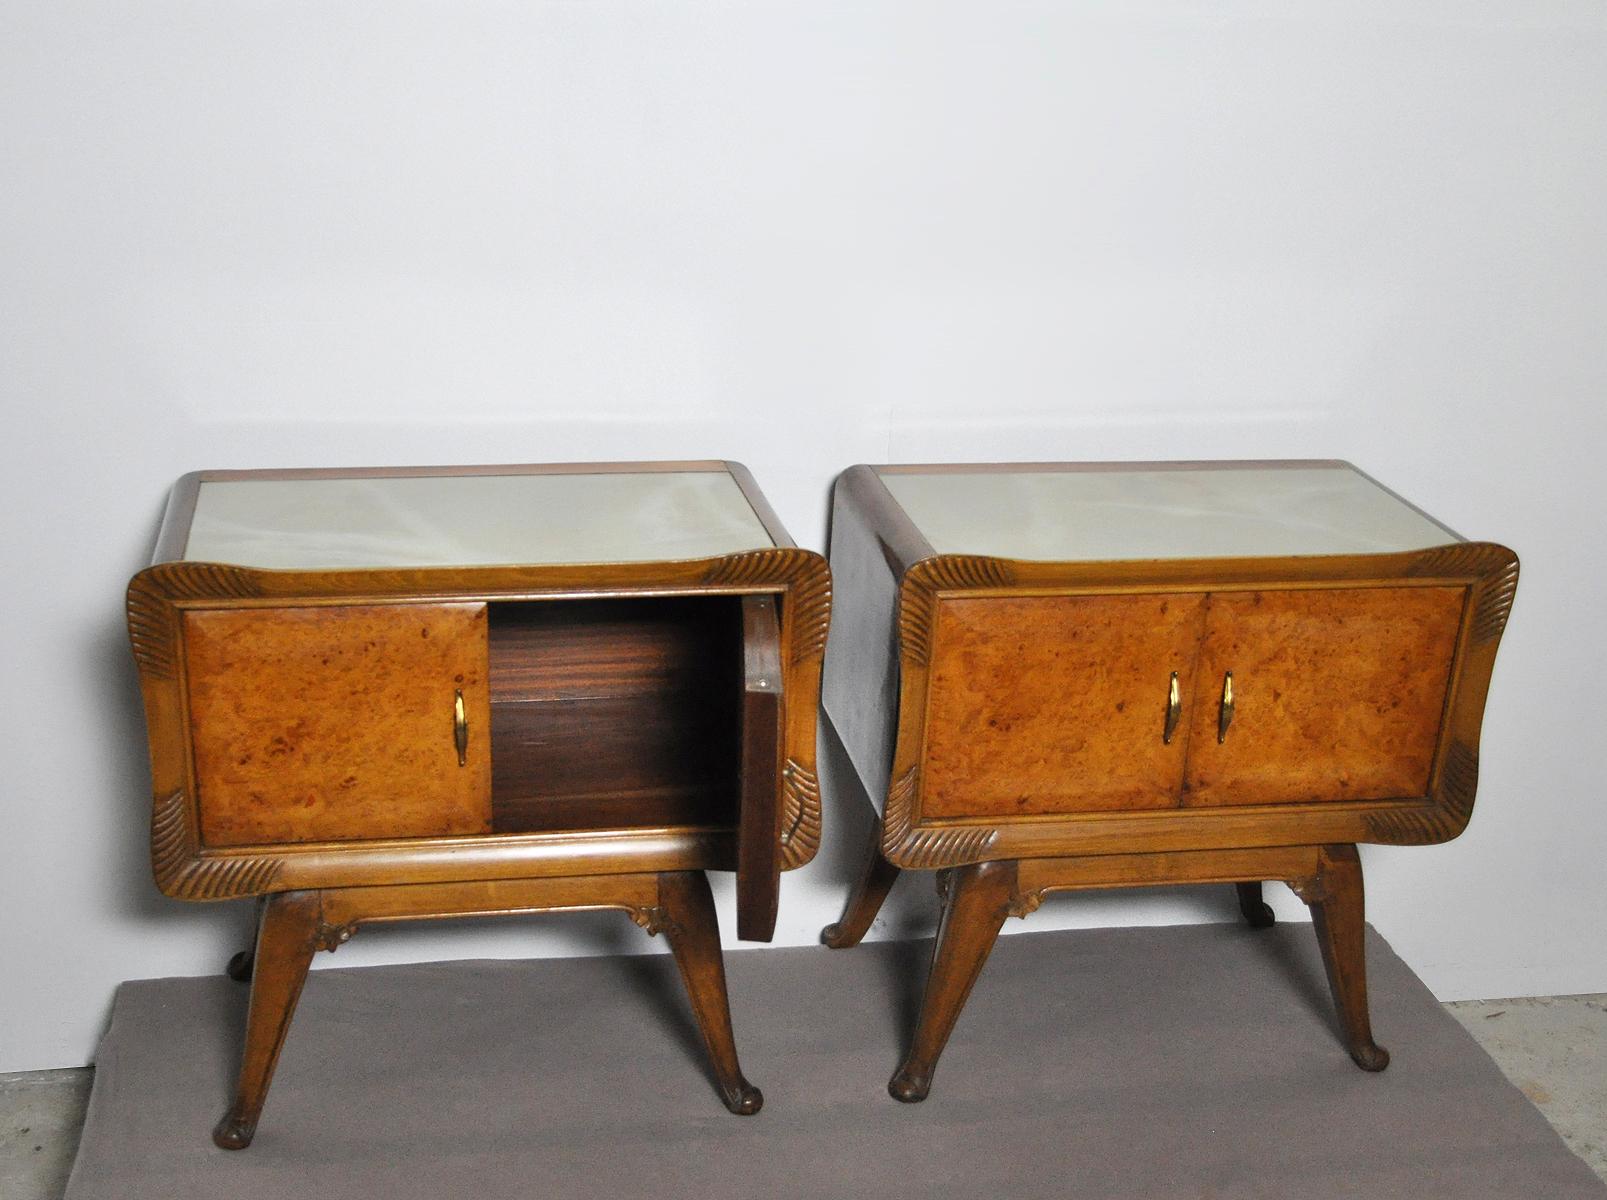 Italian Art Deco Set of Chest of Drawers and Nightstands, 1930s For Sale 4